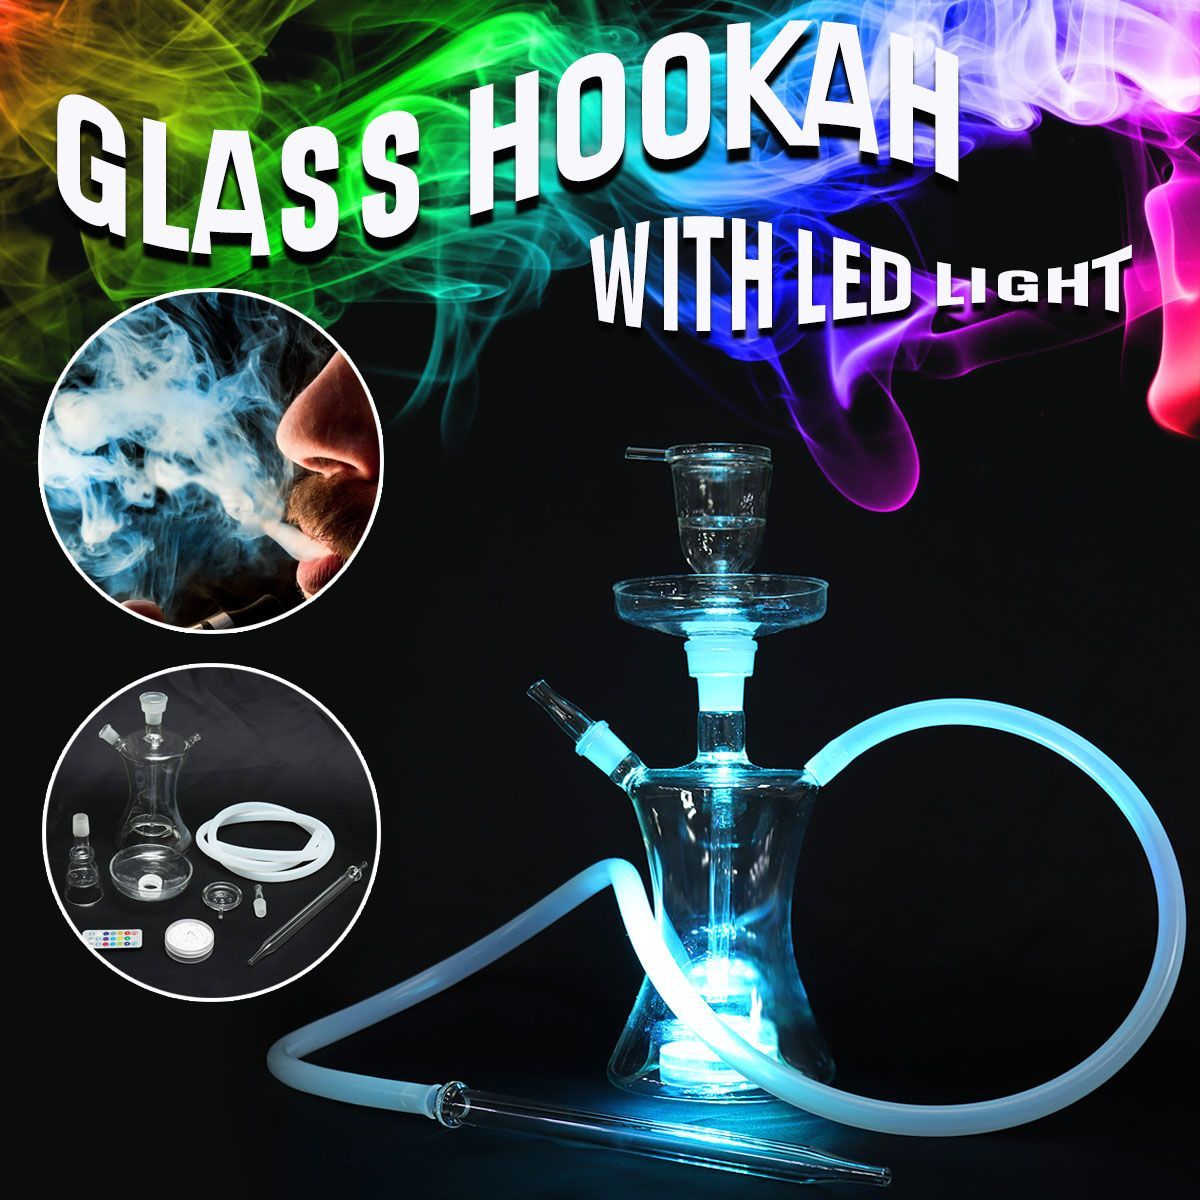 148cm-Water-Glass-Pipe-Silicone-Straw-Bottle-Glassware-Kit-with-LED-Light-1457316